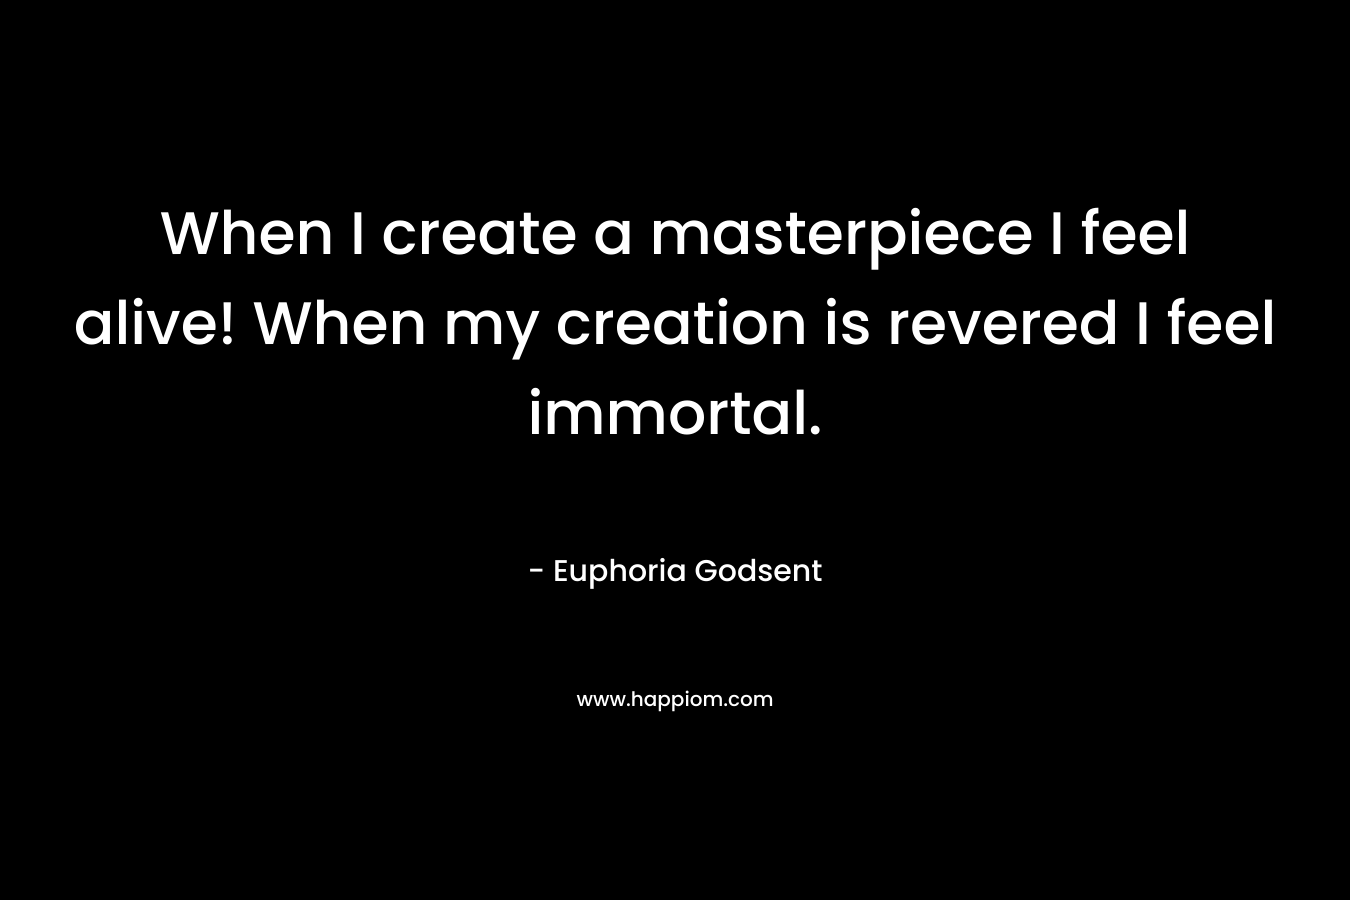 When I create a masterpiece I feel alive! When my creation is revered I feel immortal.